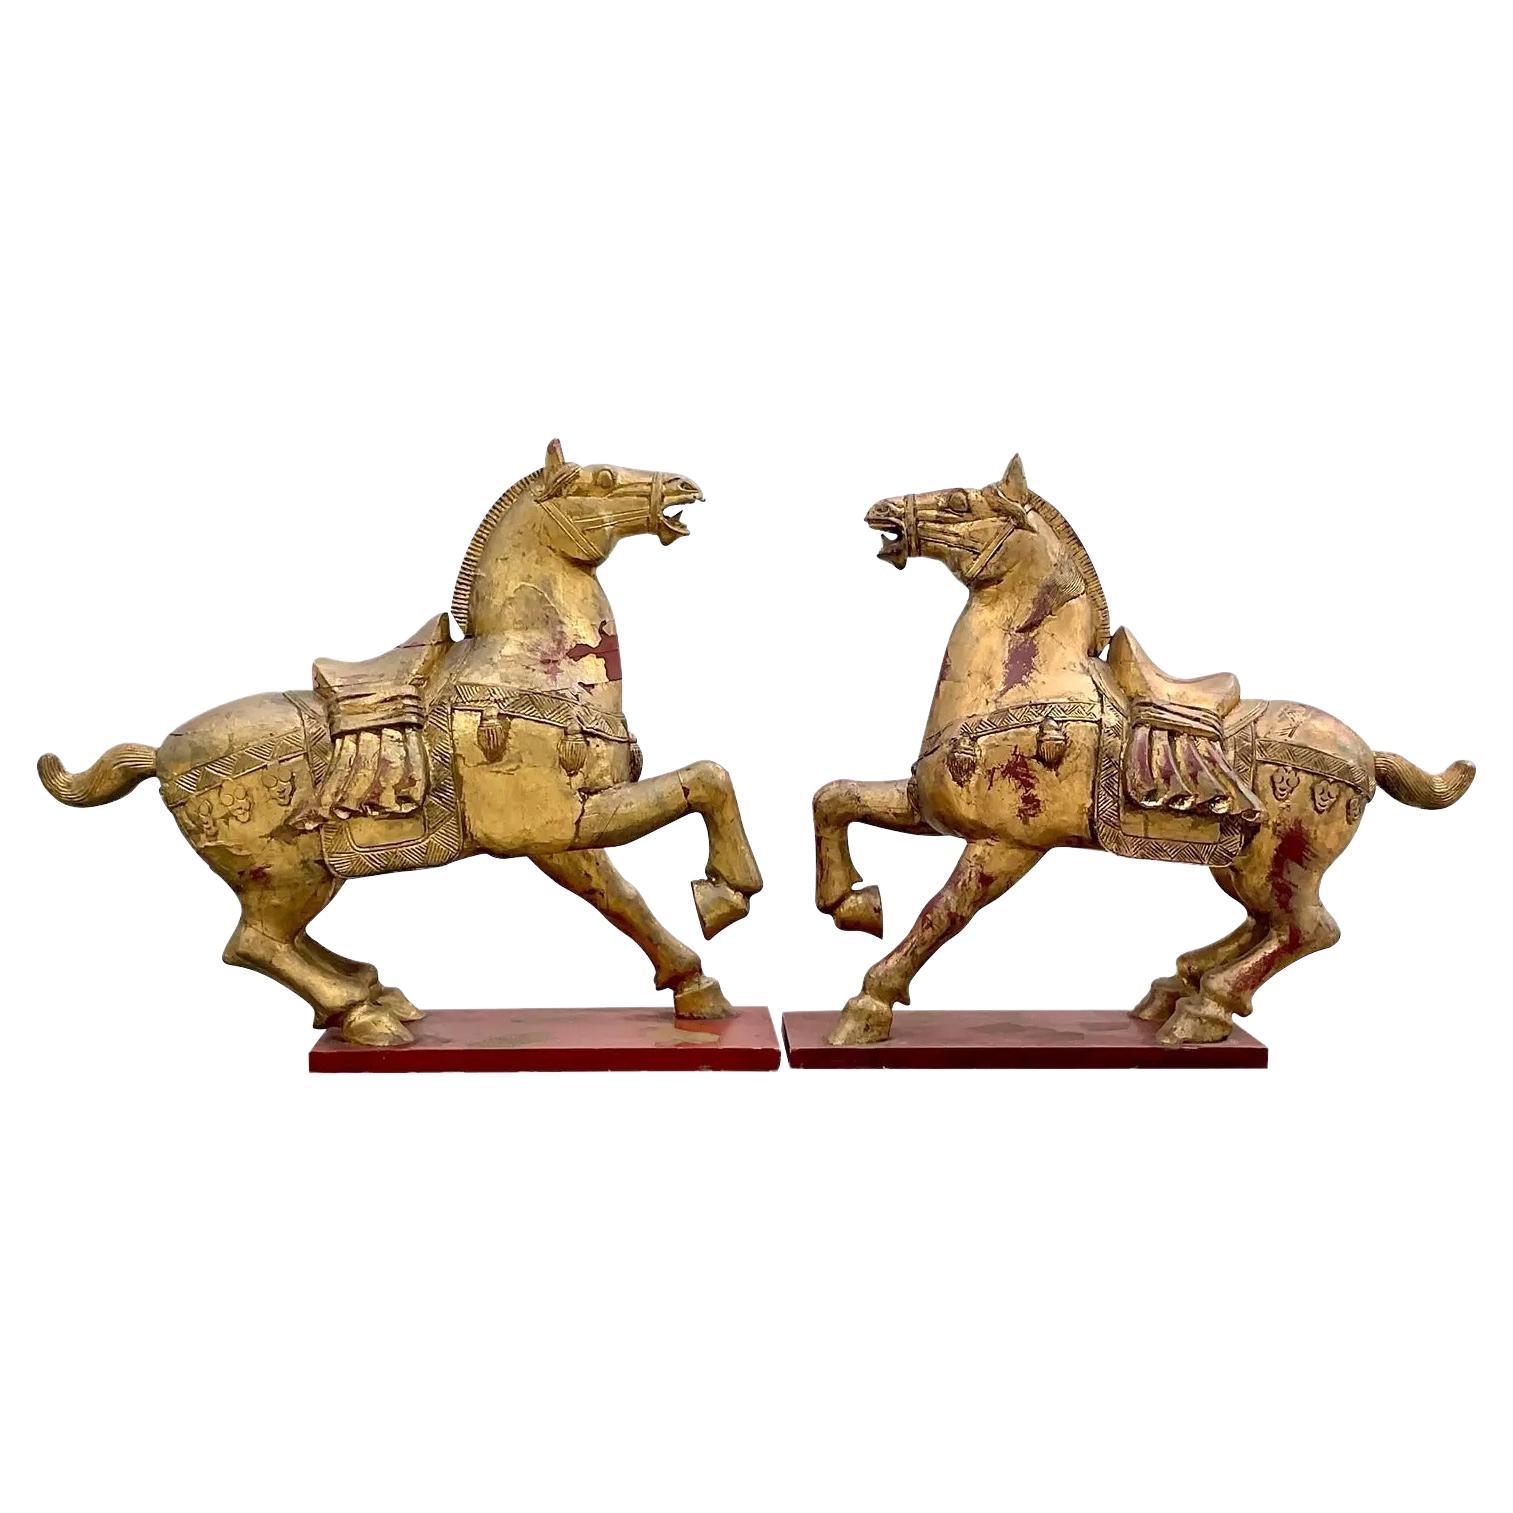 Vintage Asian Gilt Carved Wooden Emperor Horses - a Pair